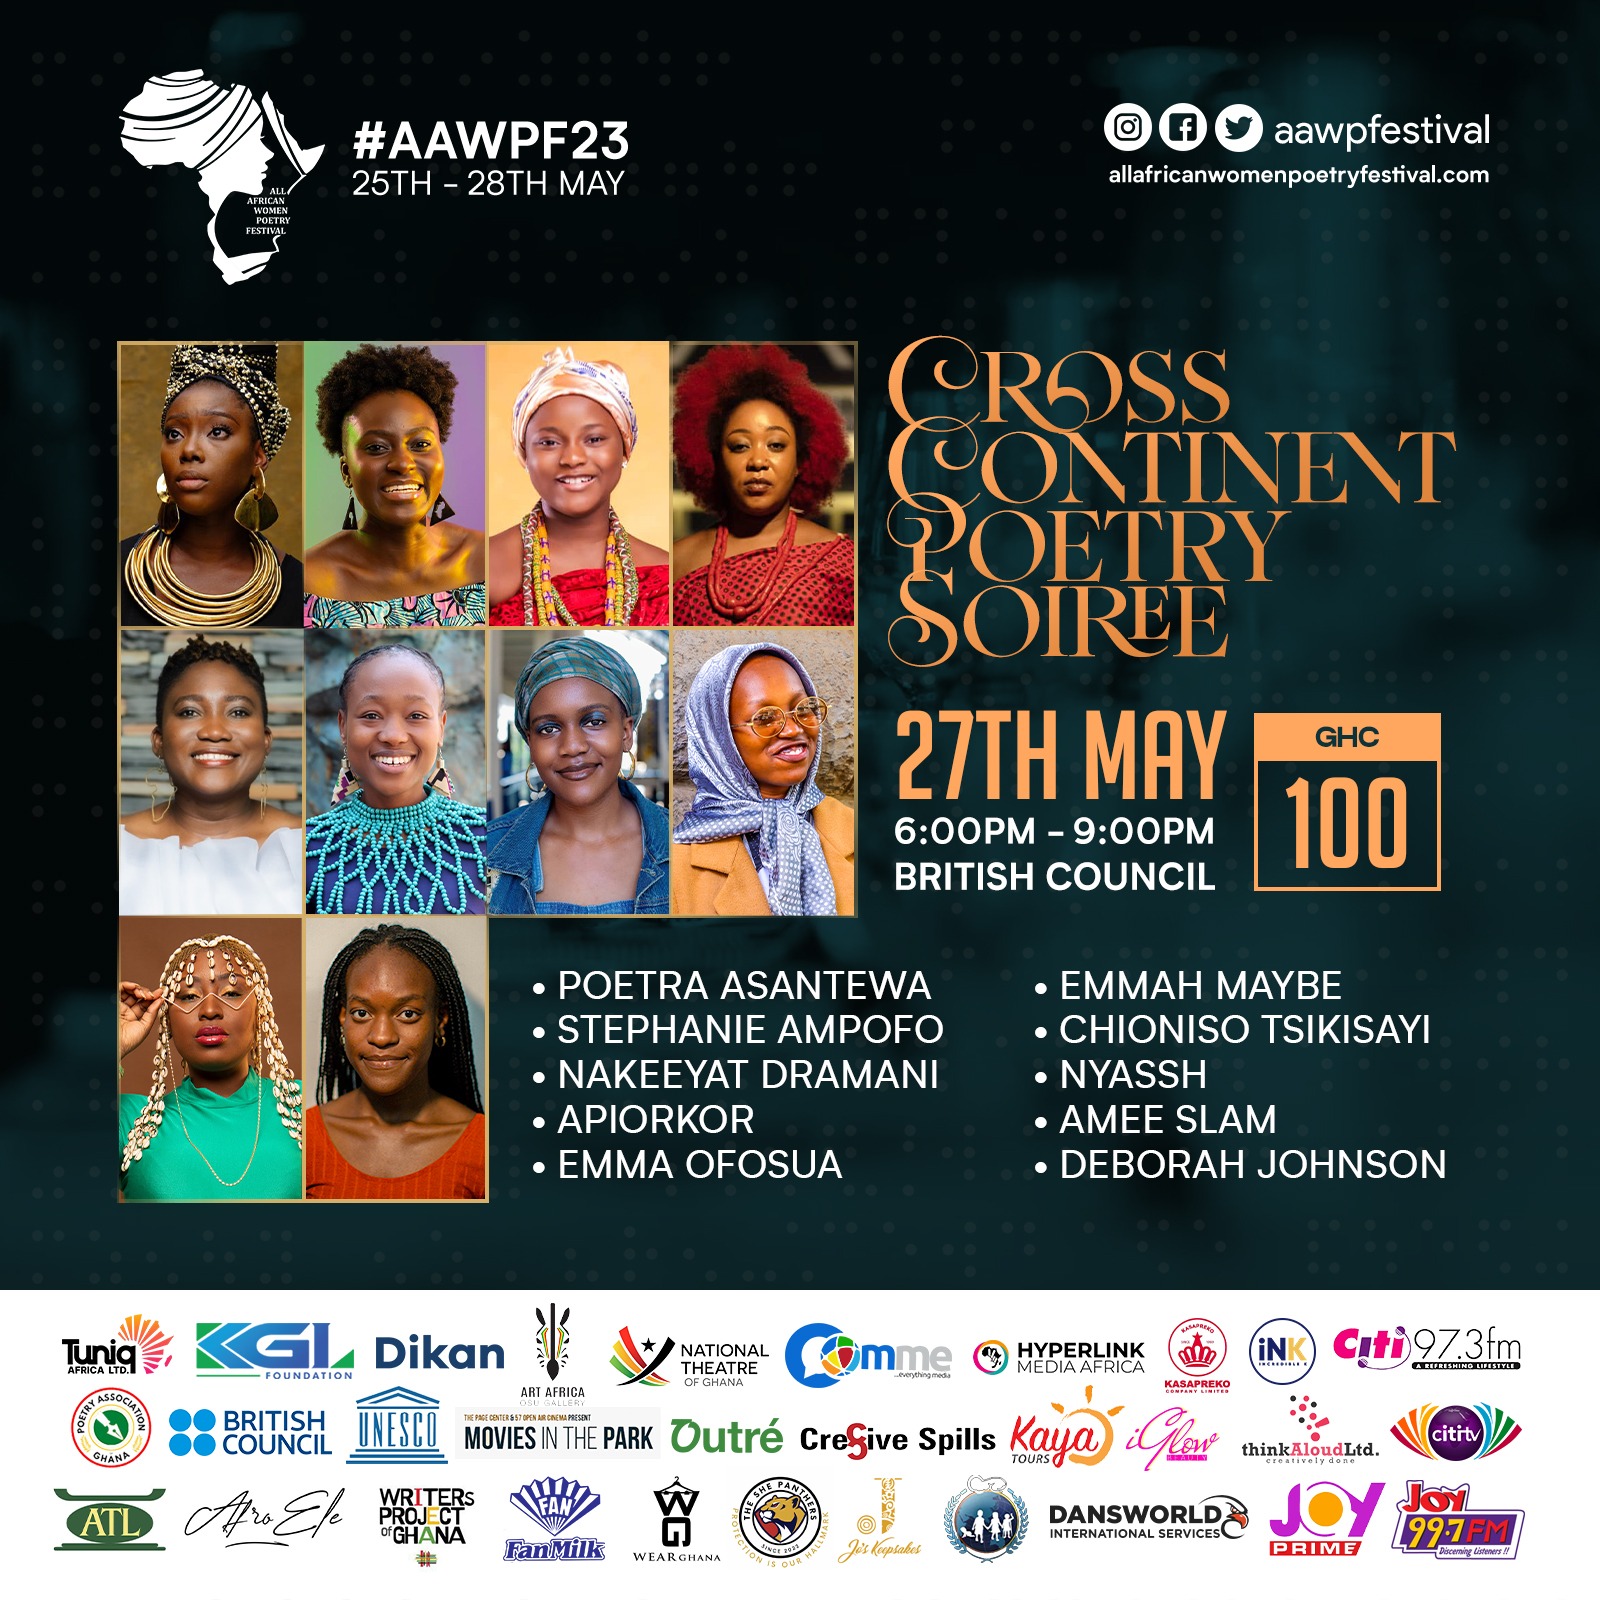 All-African Women Poetry Festival slated for May 25-28 in Ghana